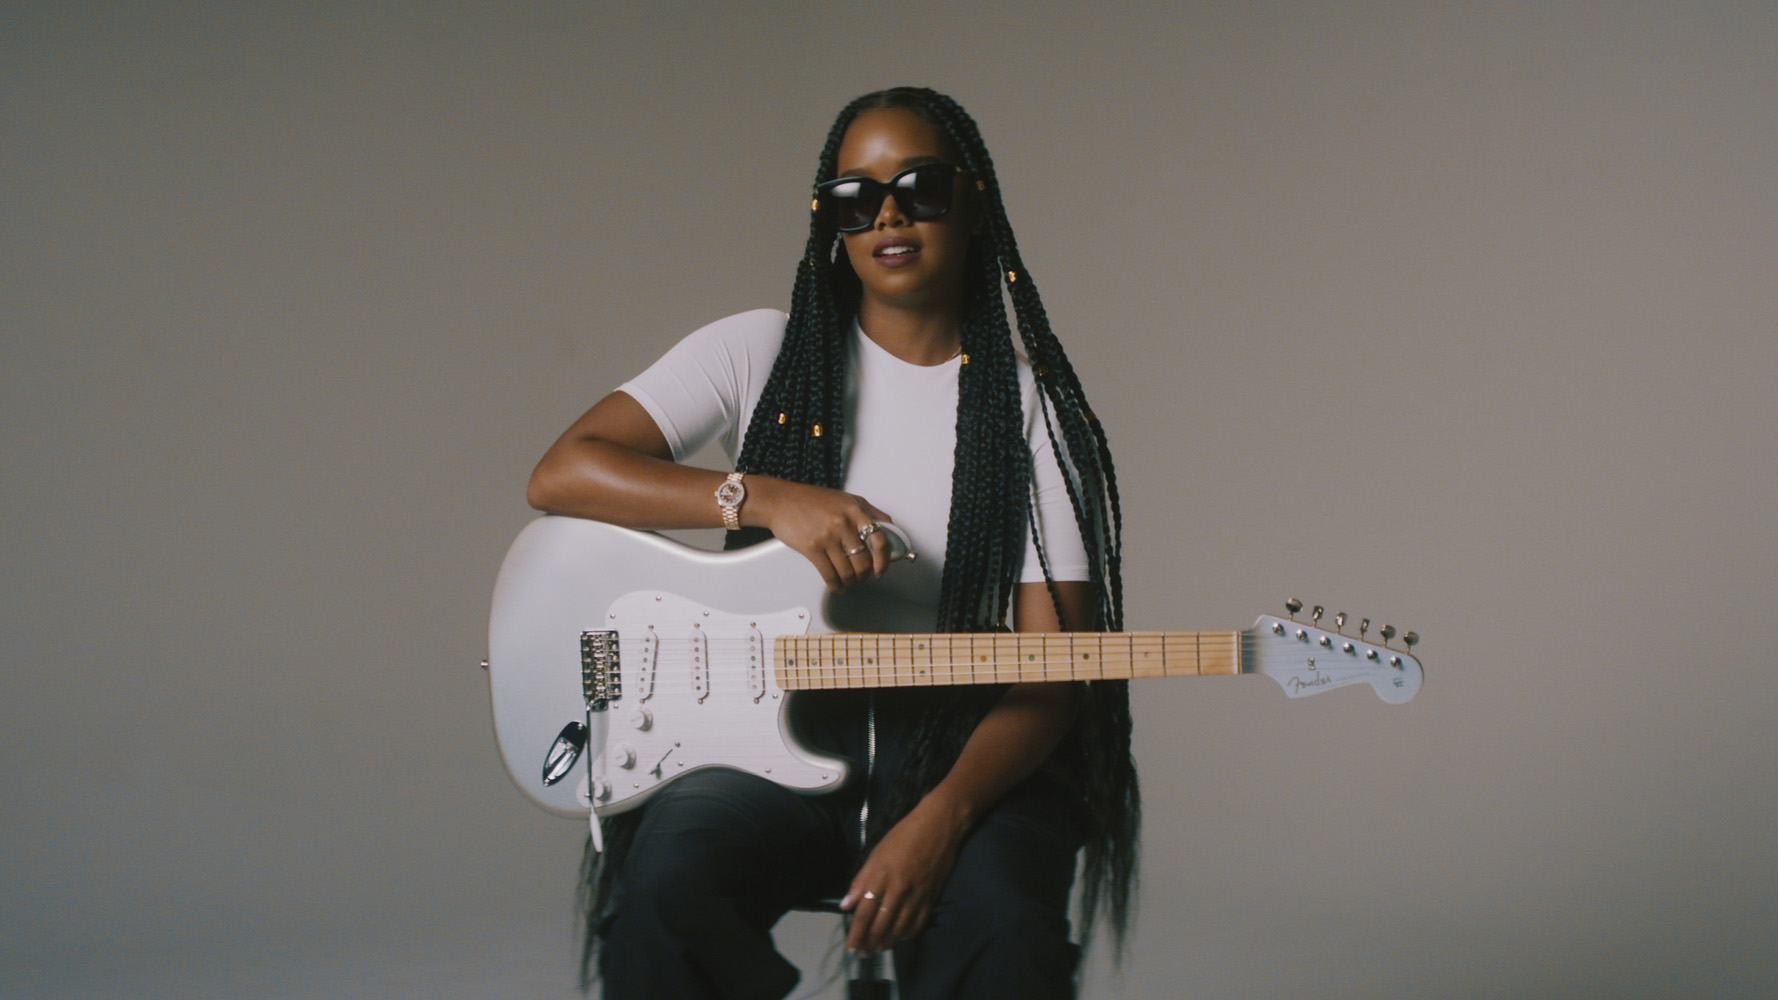 H.E.R. Makes History as First Black Female Artist to Have Fender Artist Signature Guitar